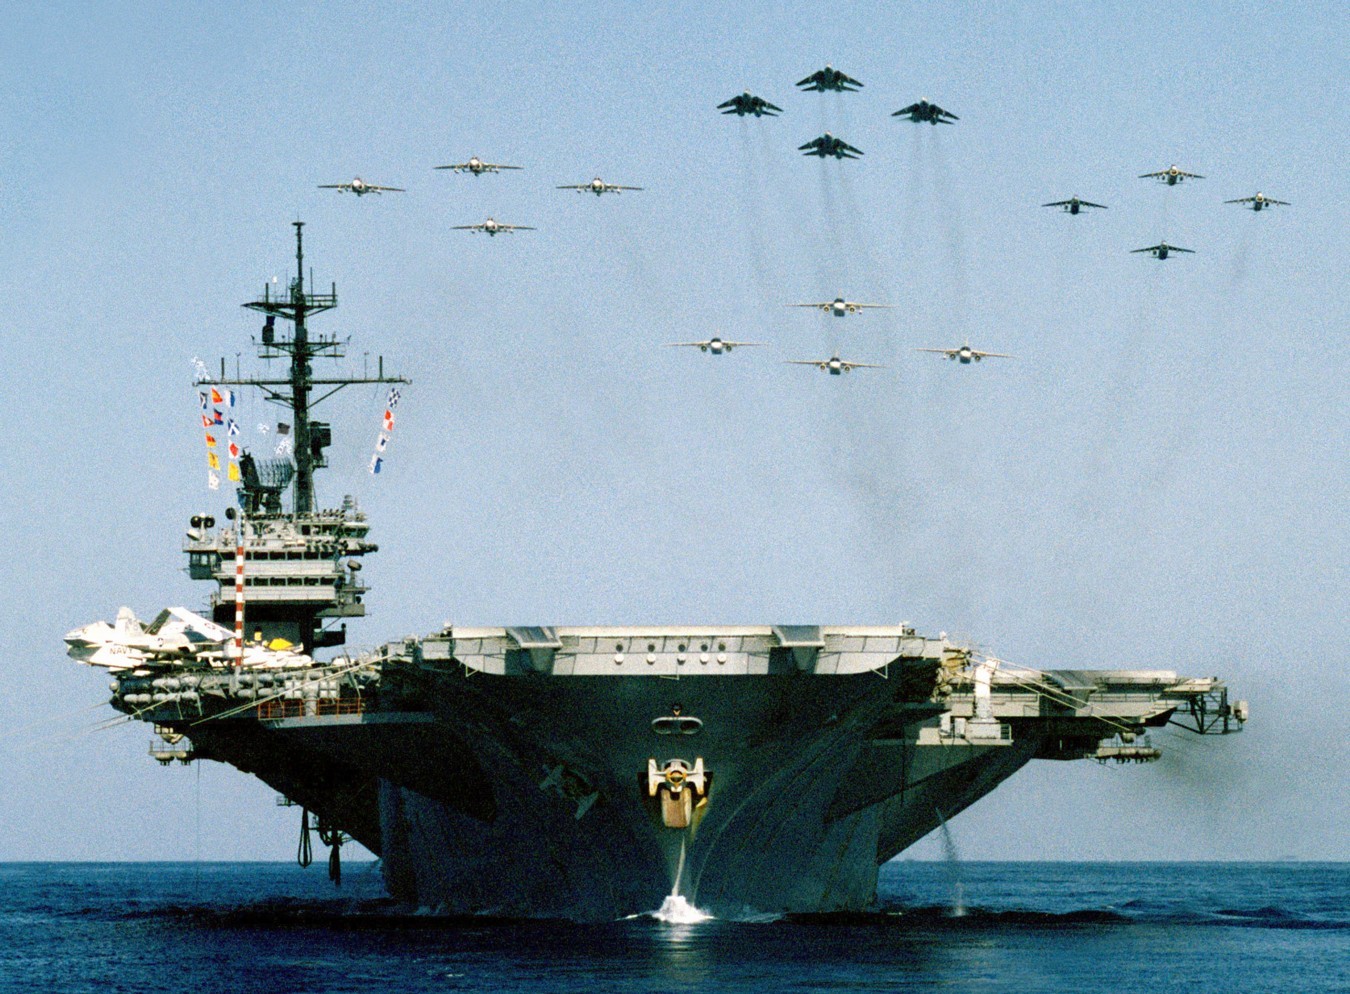 cvw-1 carrier air wing us navy uss america cv-66 embarked squadrons 19